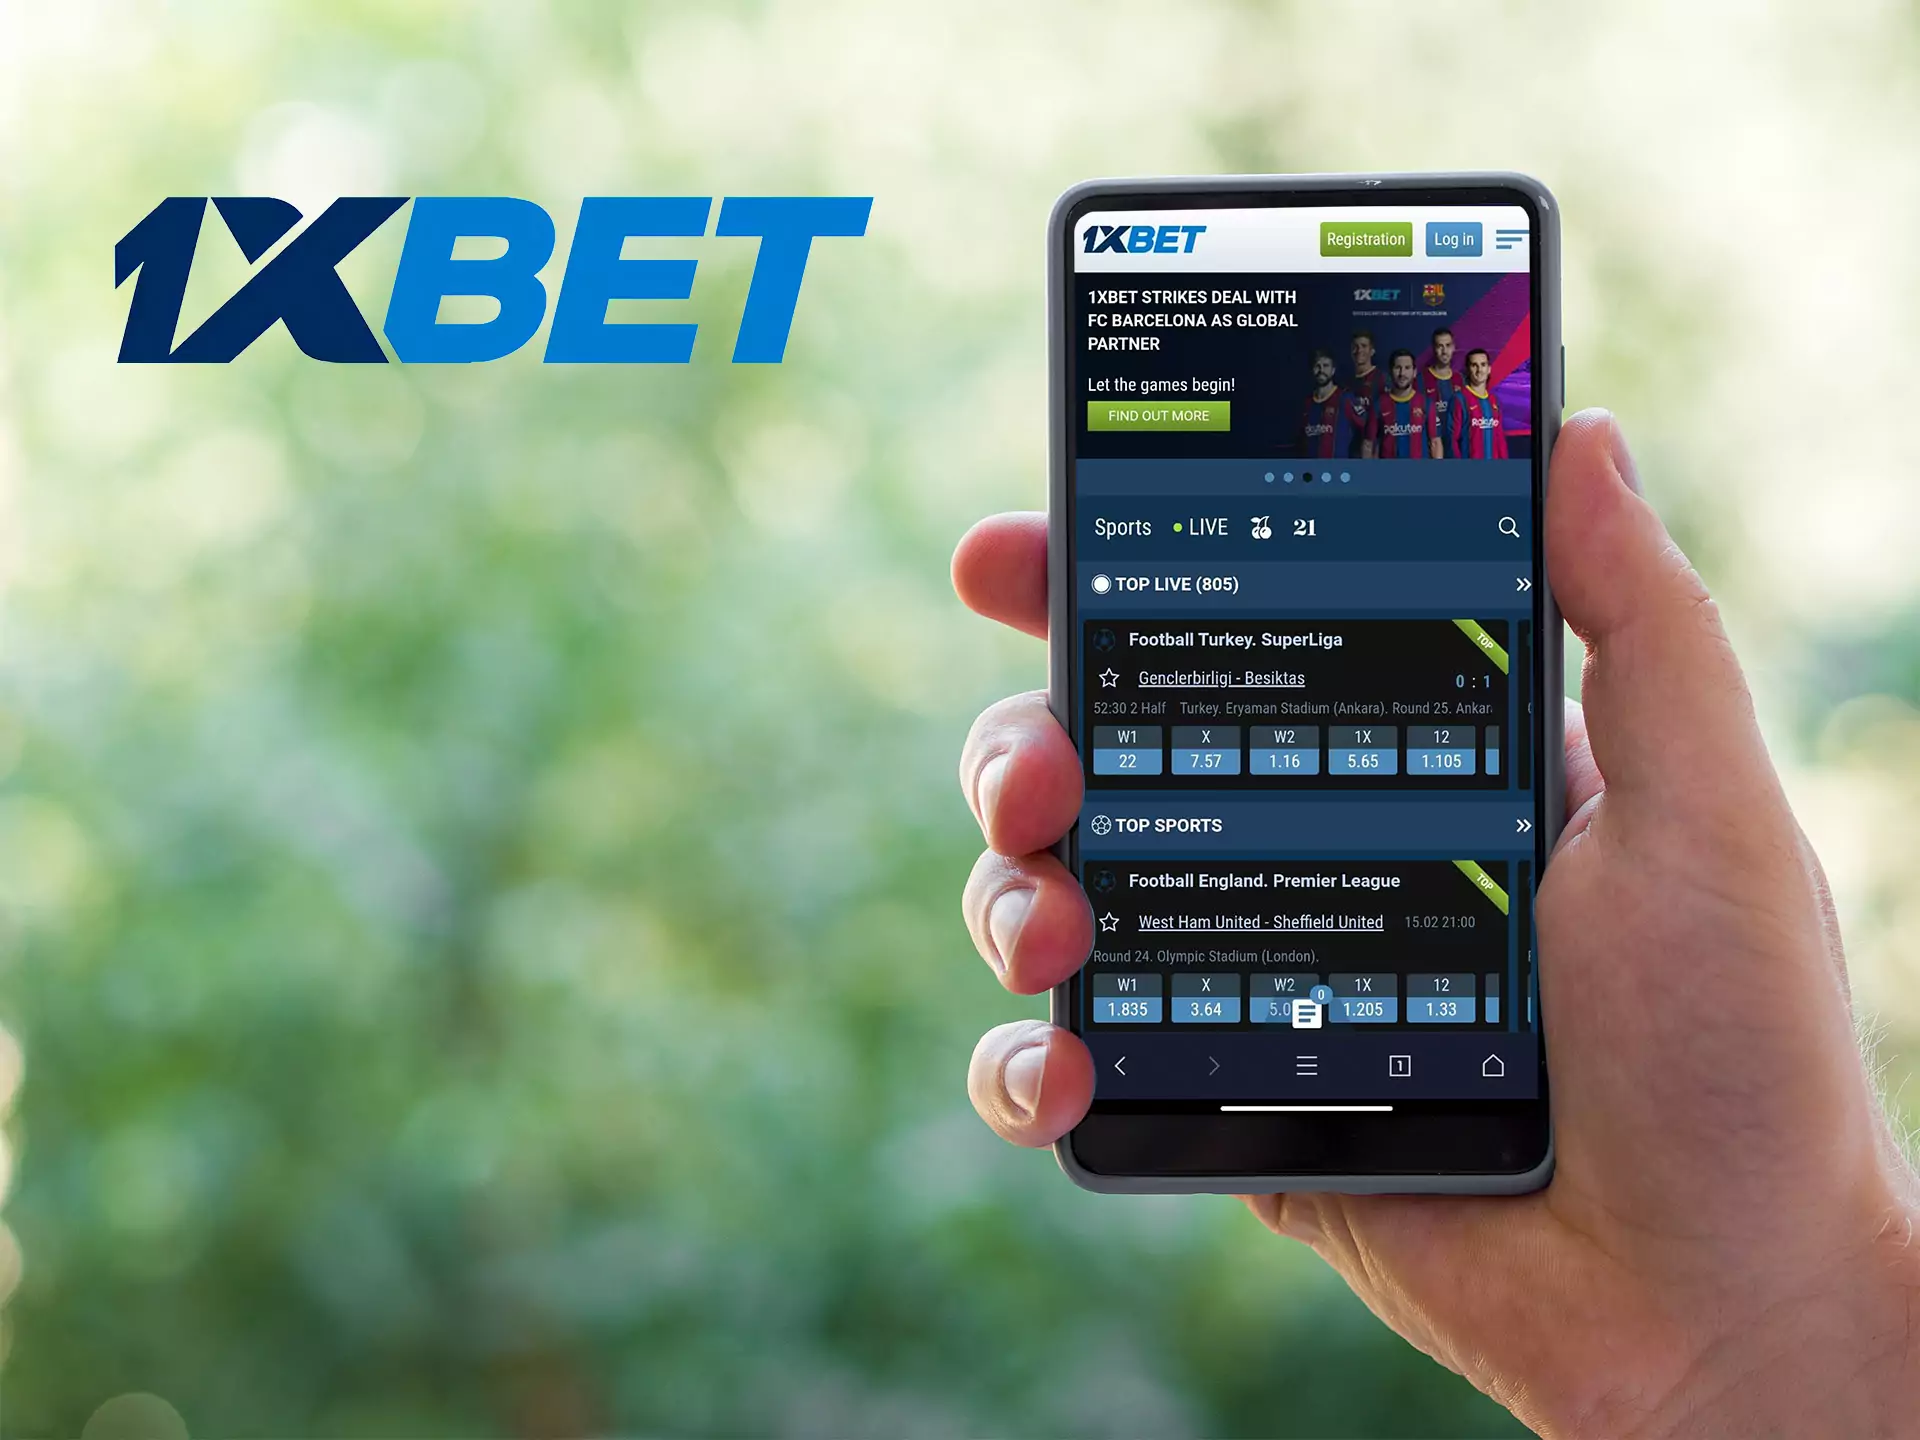 Indtall the 1xbet app and start betting in IPL matches.